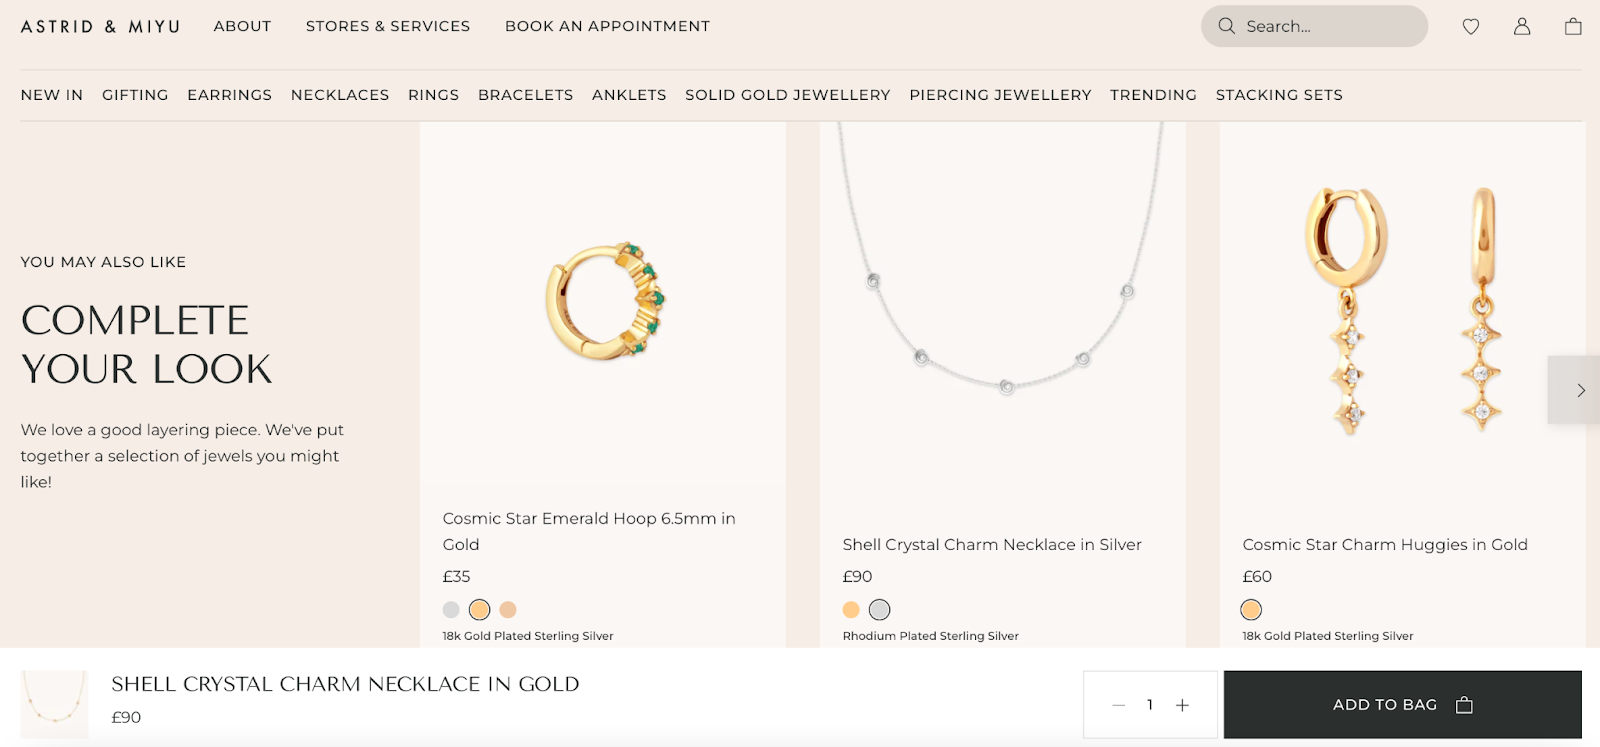 Screenshot of Astrid & Miyu jewelry website offering personalized content through AI. 